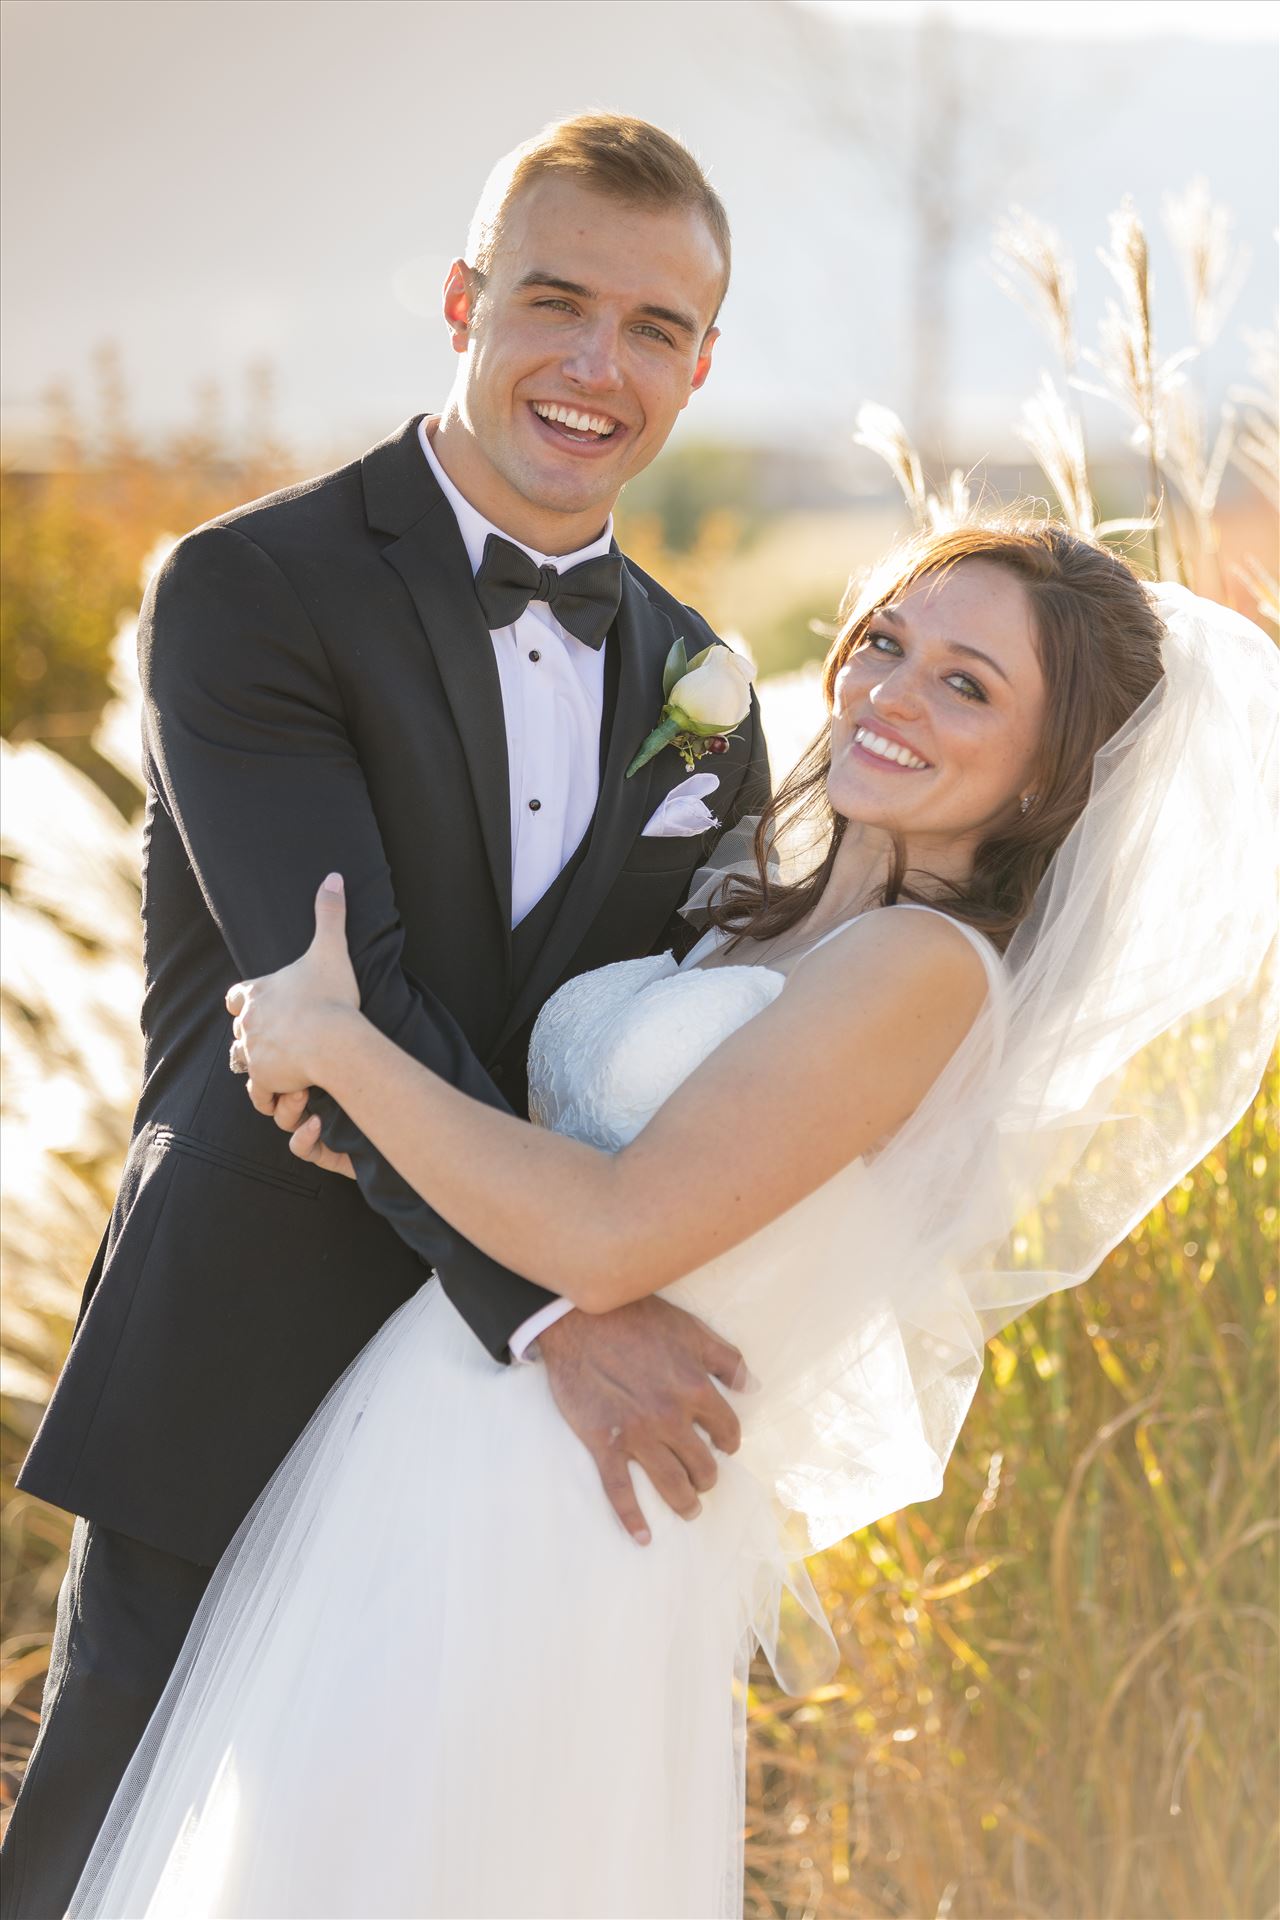 Bride and Groom - Anna and Dylan - Anna and Dylan at the Cordera Community Center in Colorado Springs, Colorado. by Scott Smith Photos